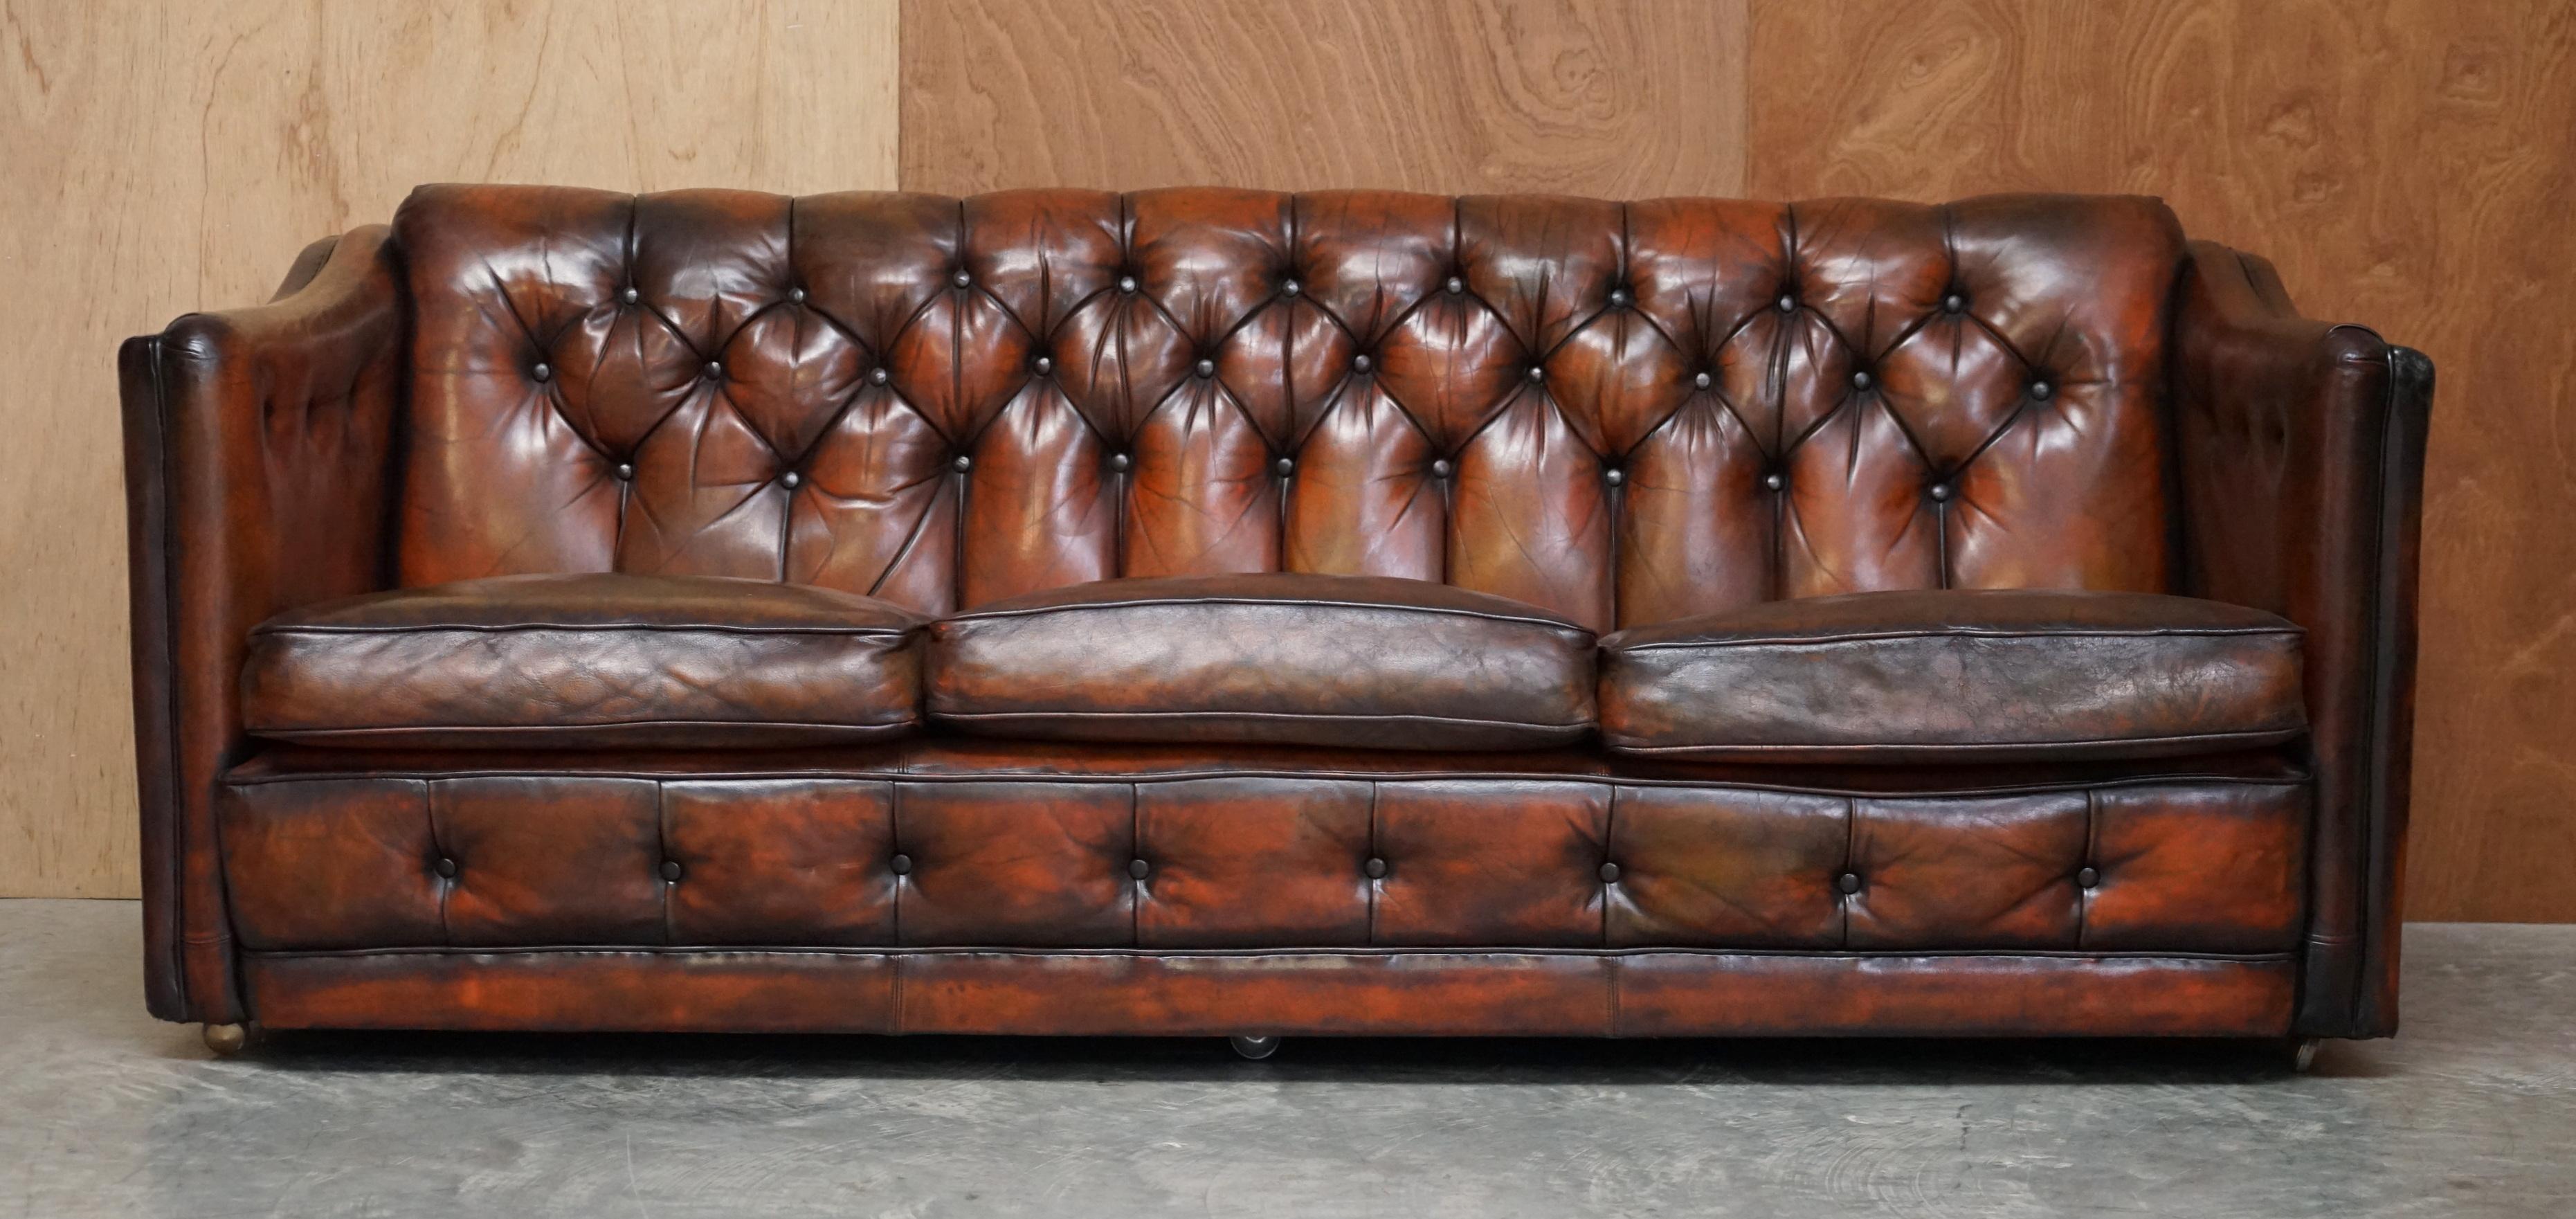 Chesterfield CIRCA 1920 ART DECO FULLY RESTORED CHESTERFIELD BROWN LEATHER SOFA PART SUITE 